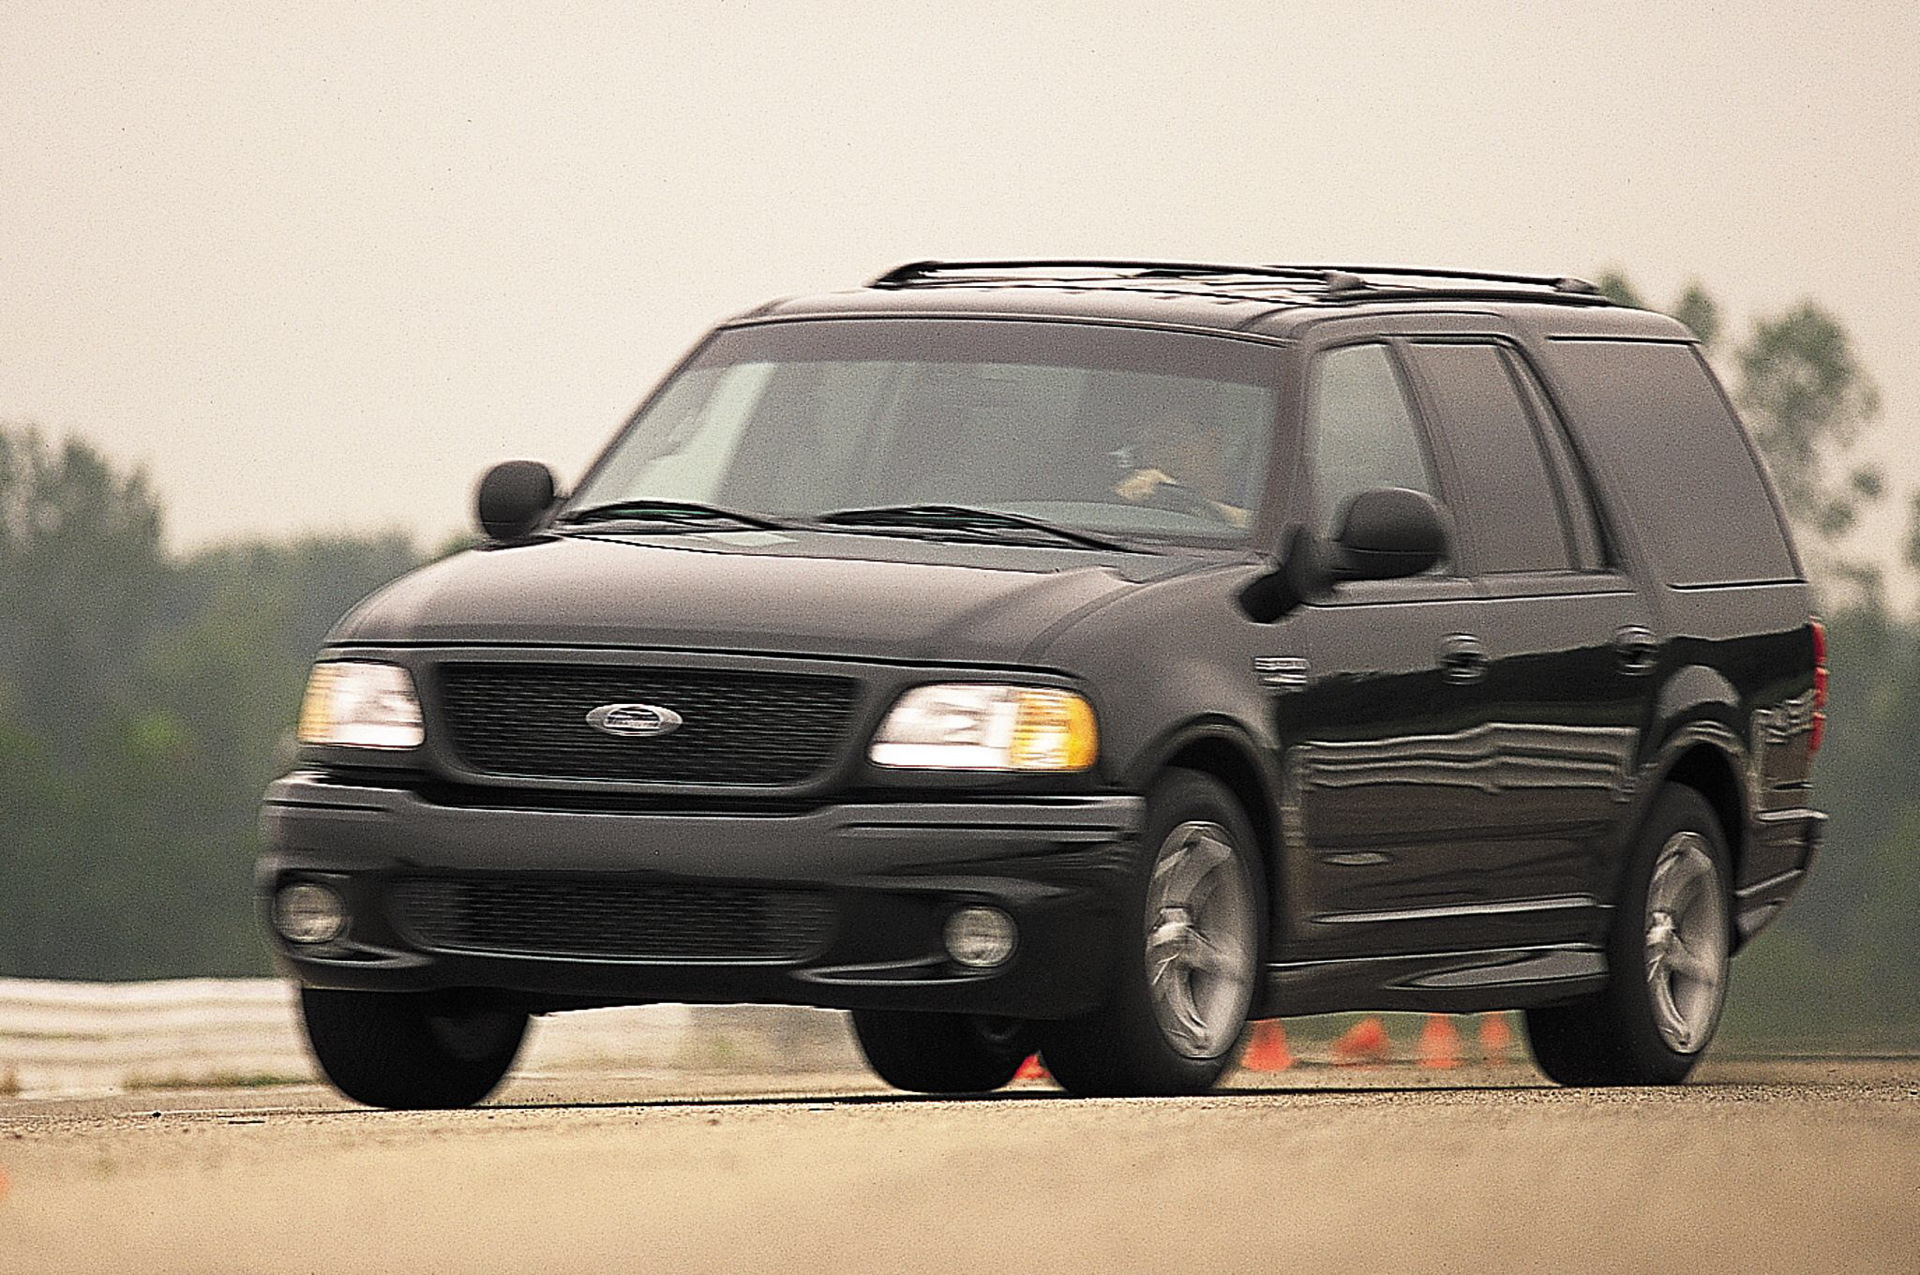 2000 Ford SVT Expedition - Truck Trend History.